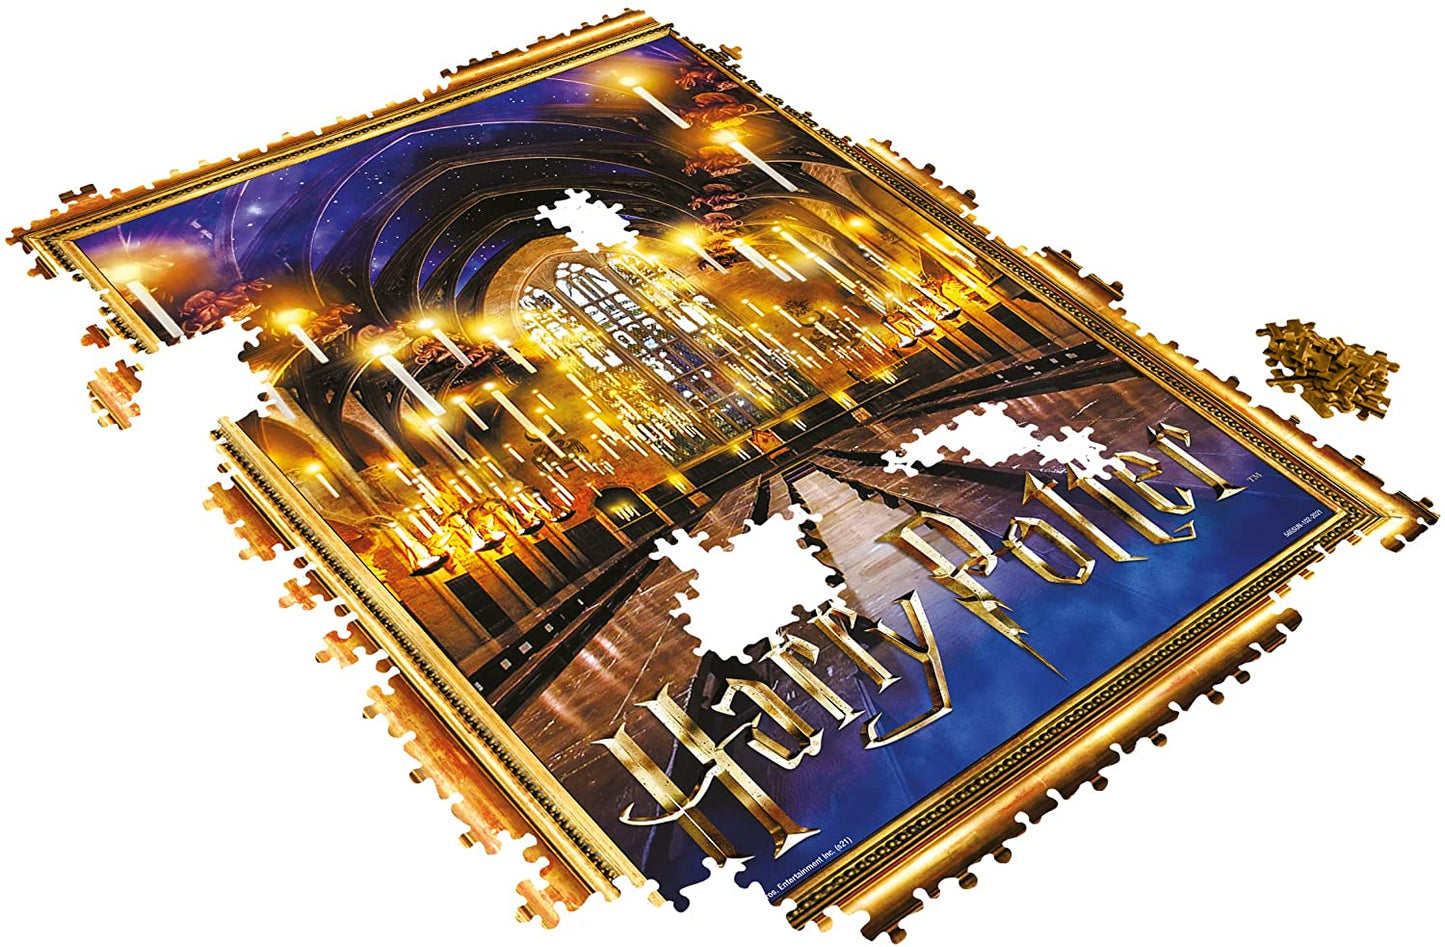 Winning Moves - Harry Potter - The Great Hall - 500 Piece Jigsaw Puzzle